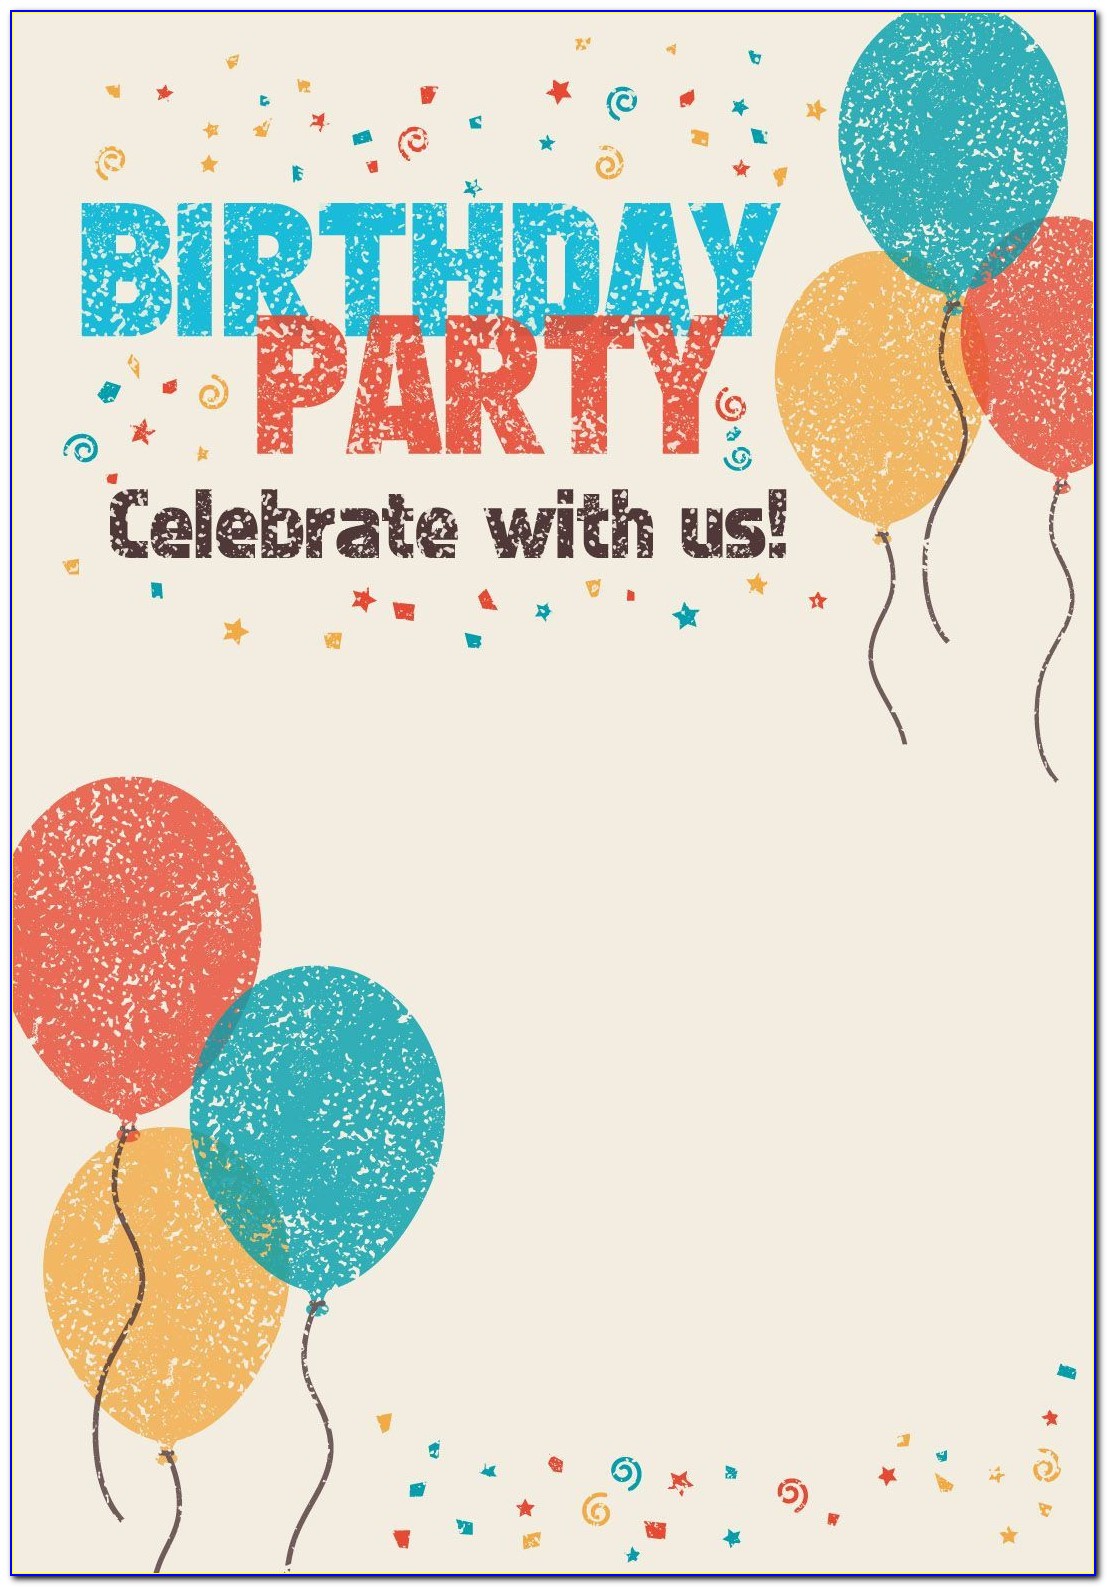 Create Birthday Invitation Card Online Free For Adults